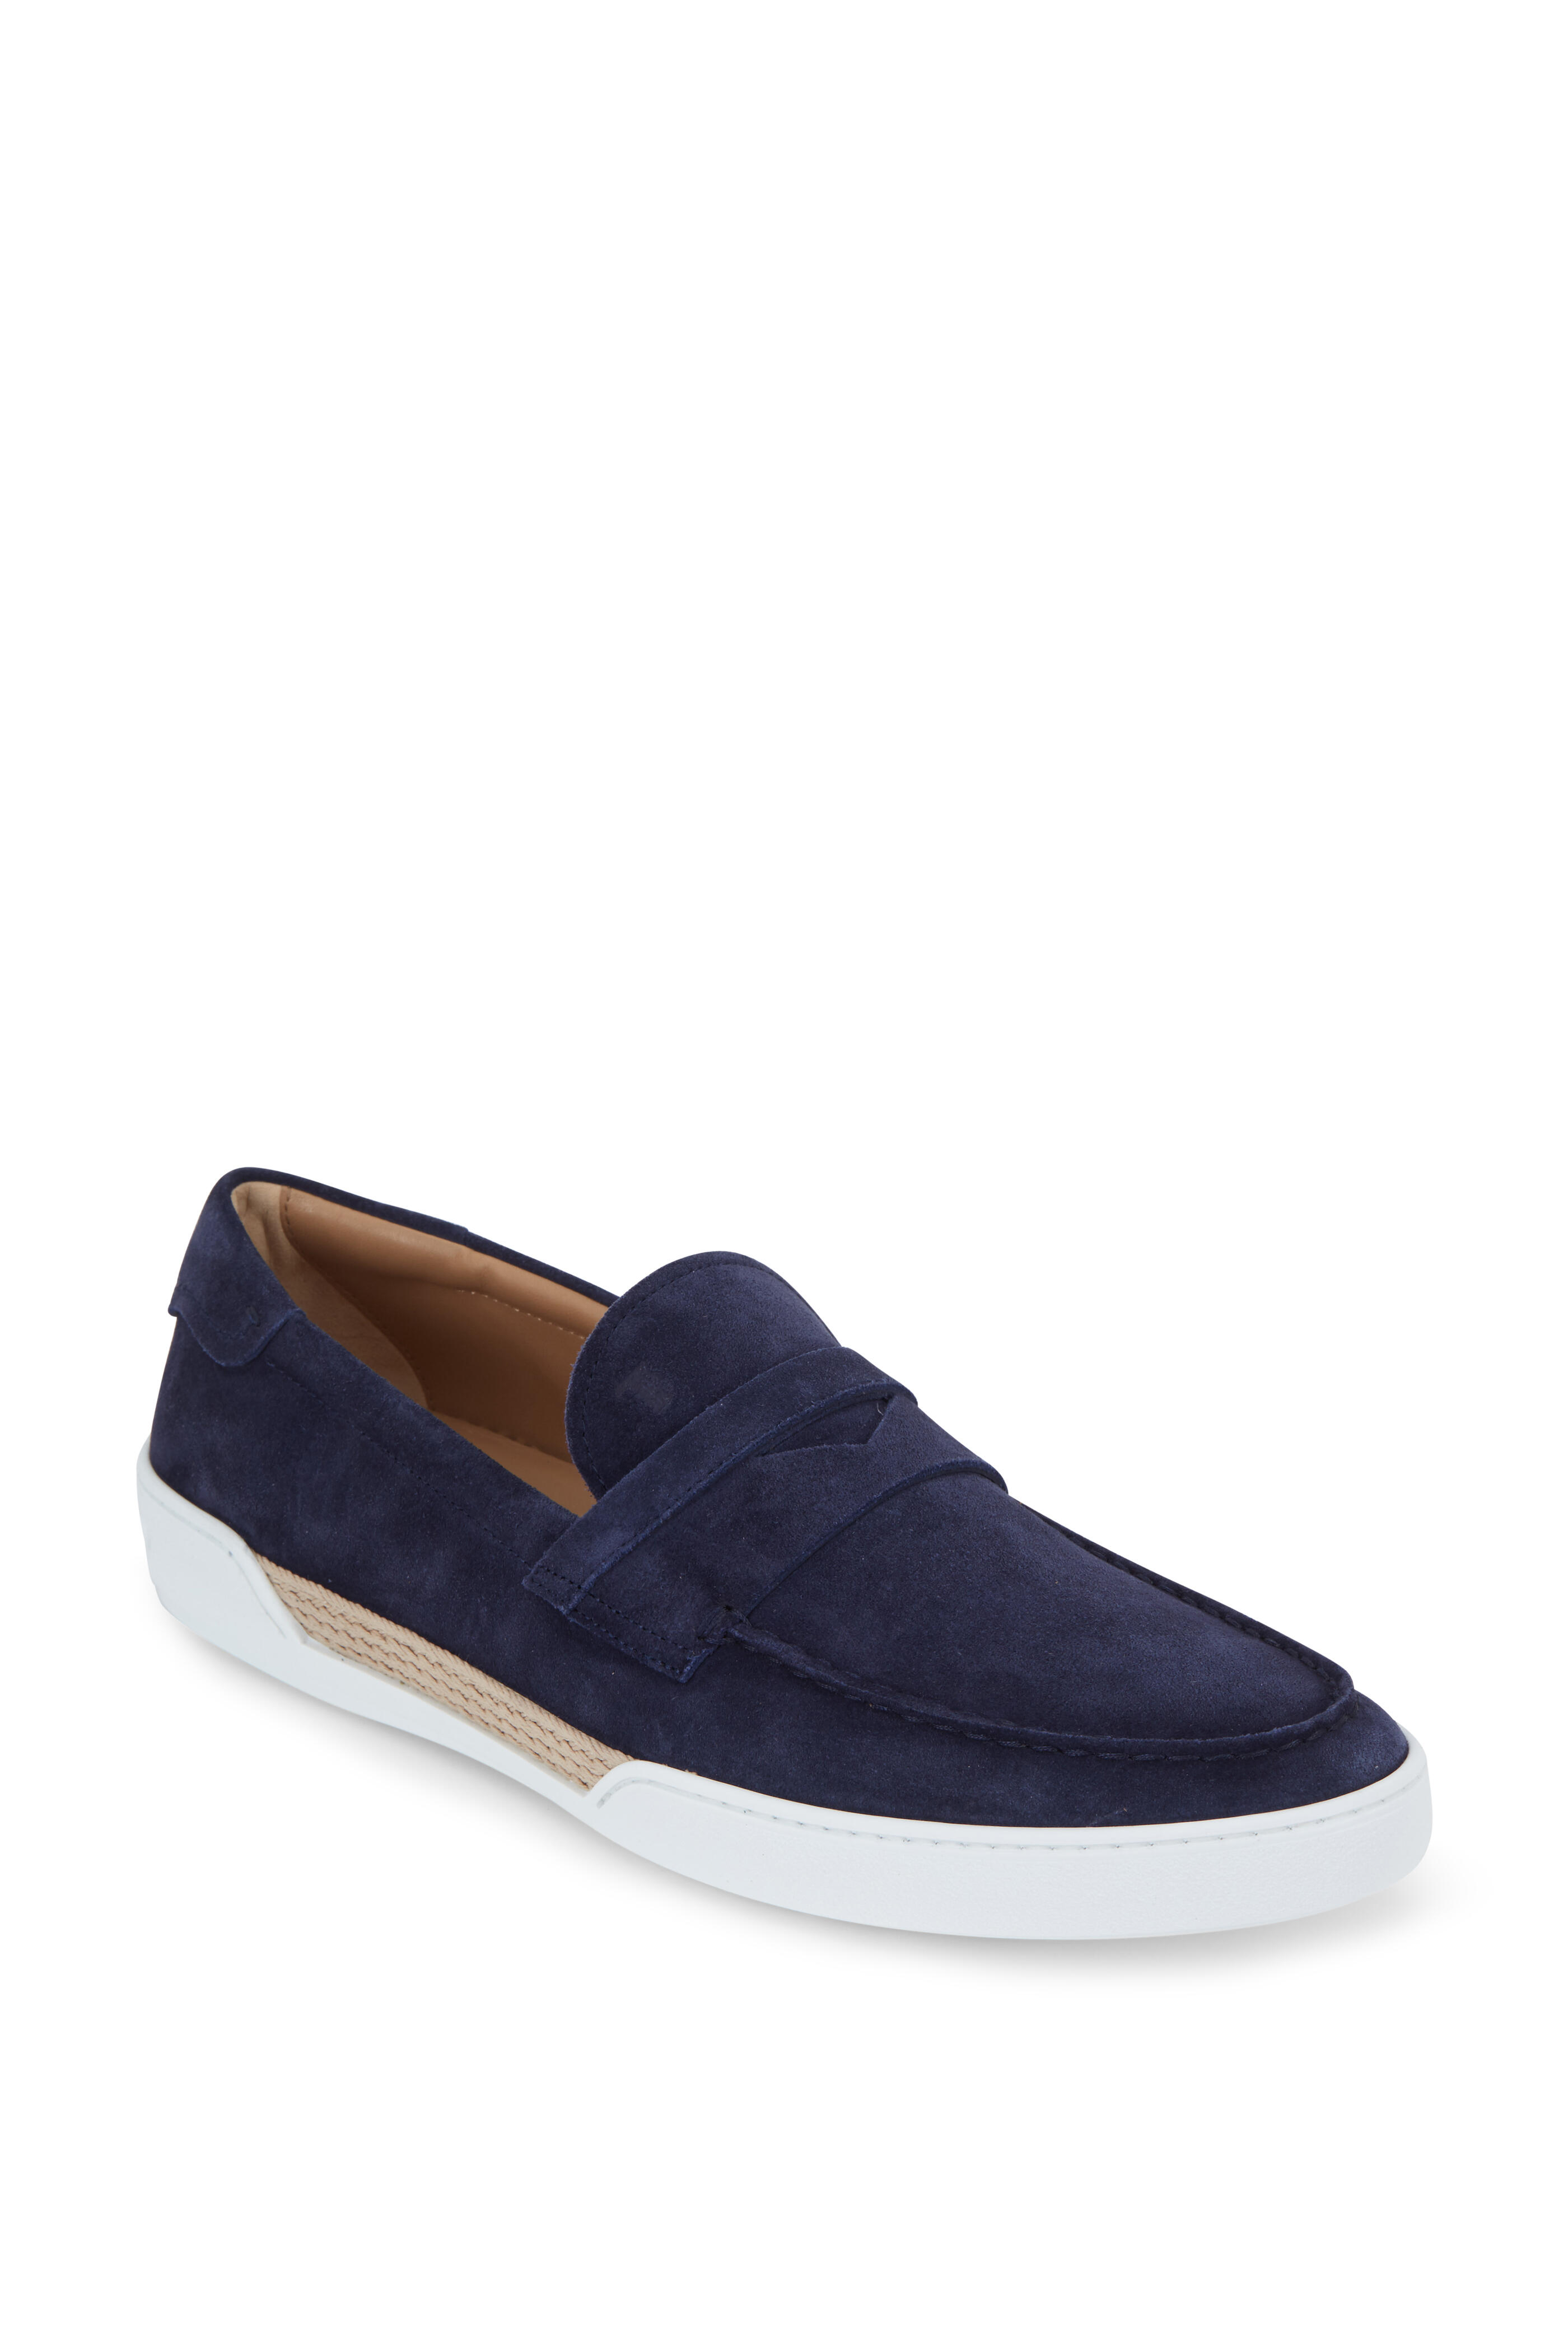 Tod's - Gomma Navy Blue Suede Penny Loafer | Mitchell Stores